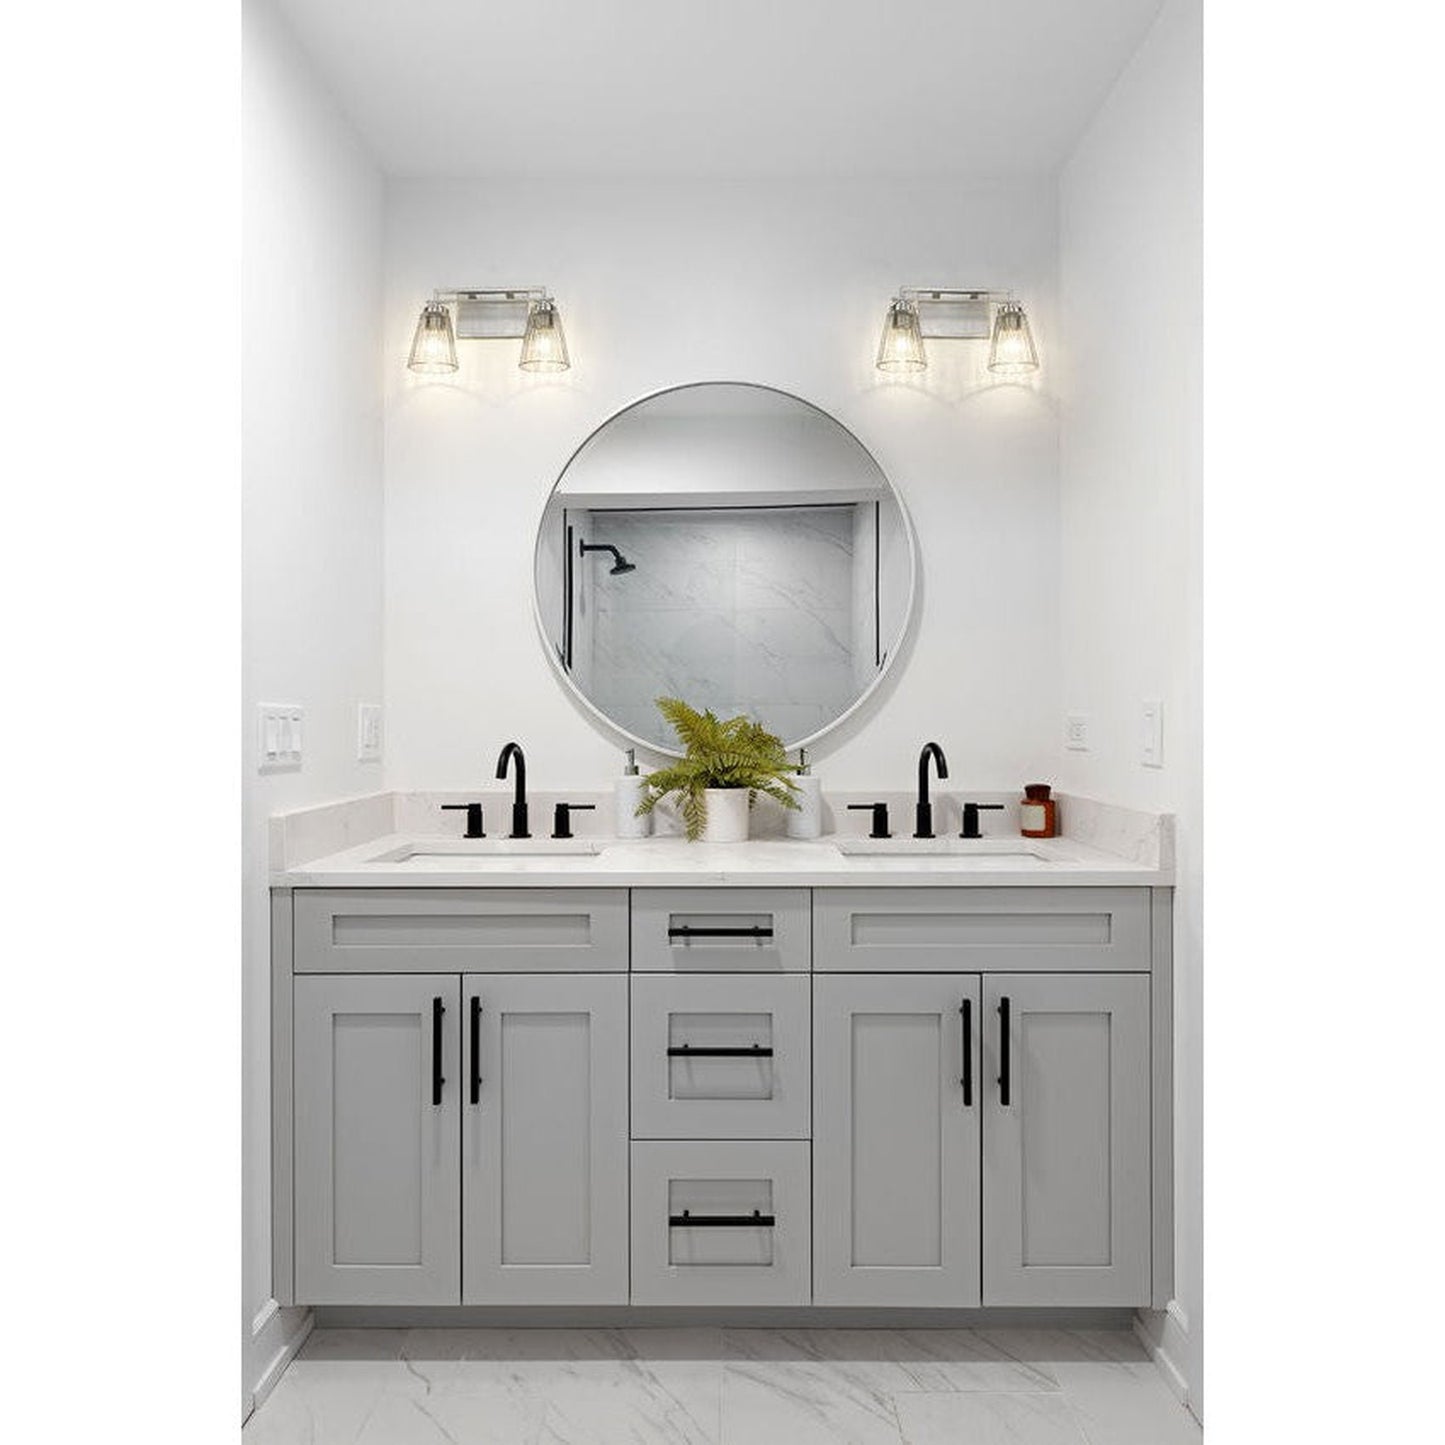 Z-Lite Lyna 7" 2-Light Brushed Nickel and Clear Glass Shade Vanity Light